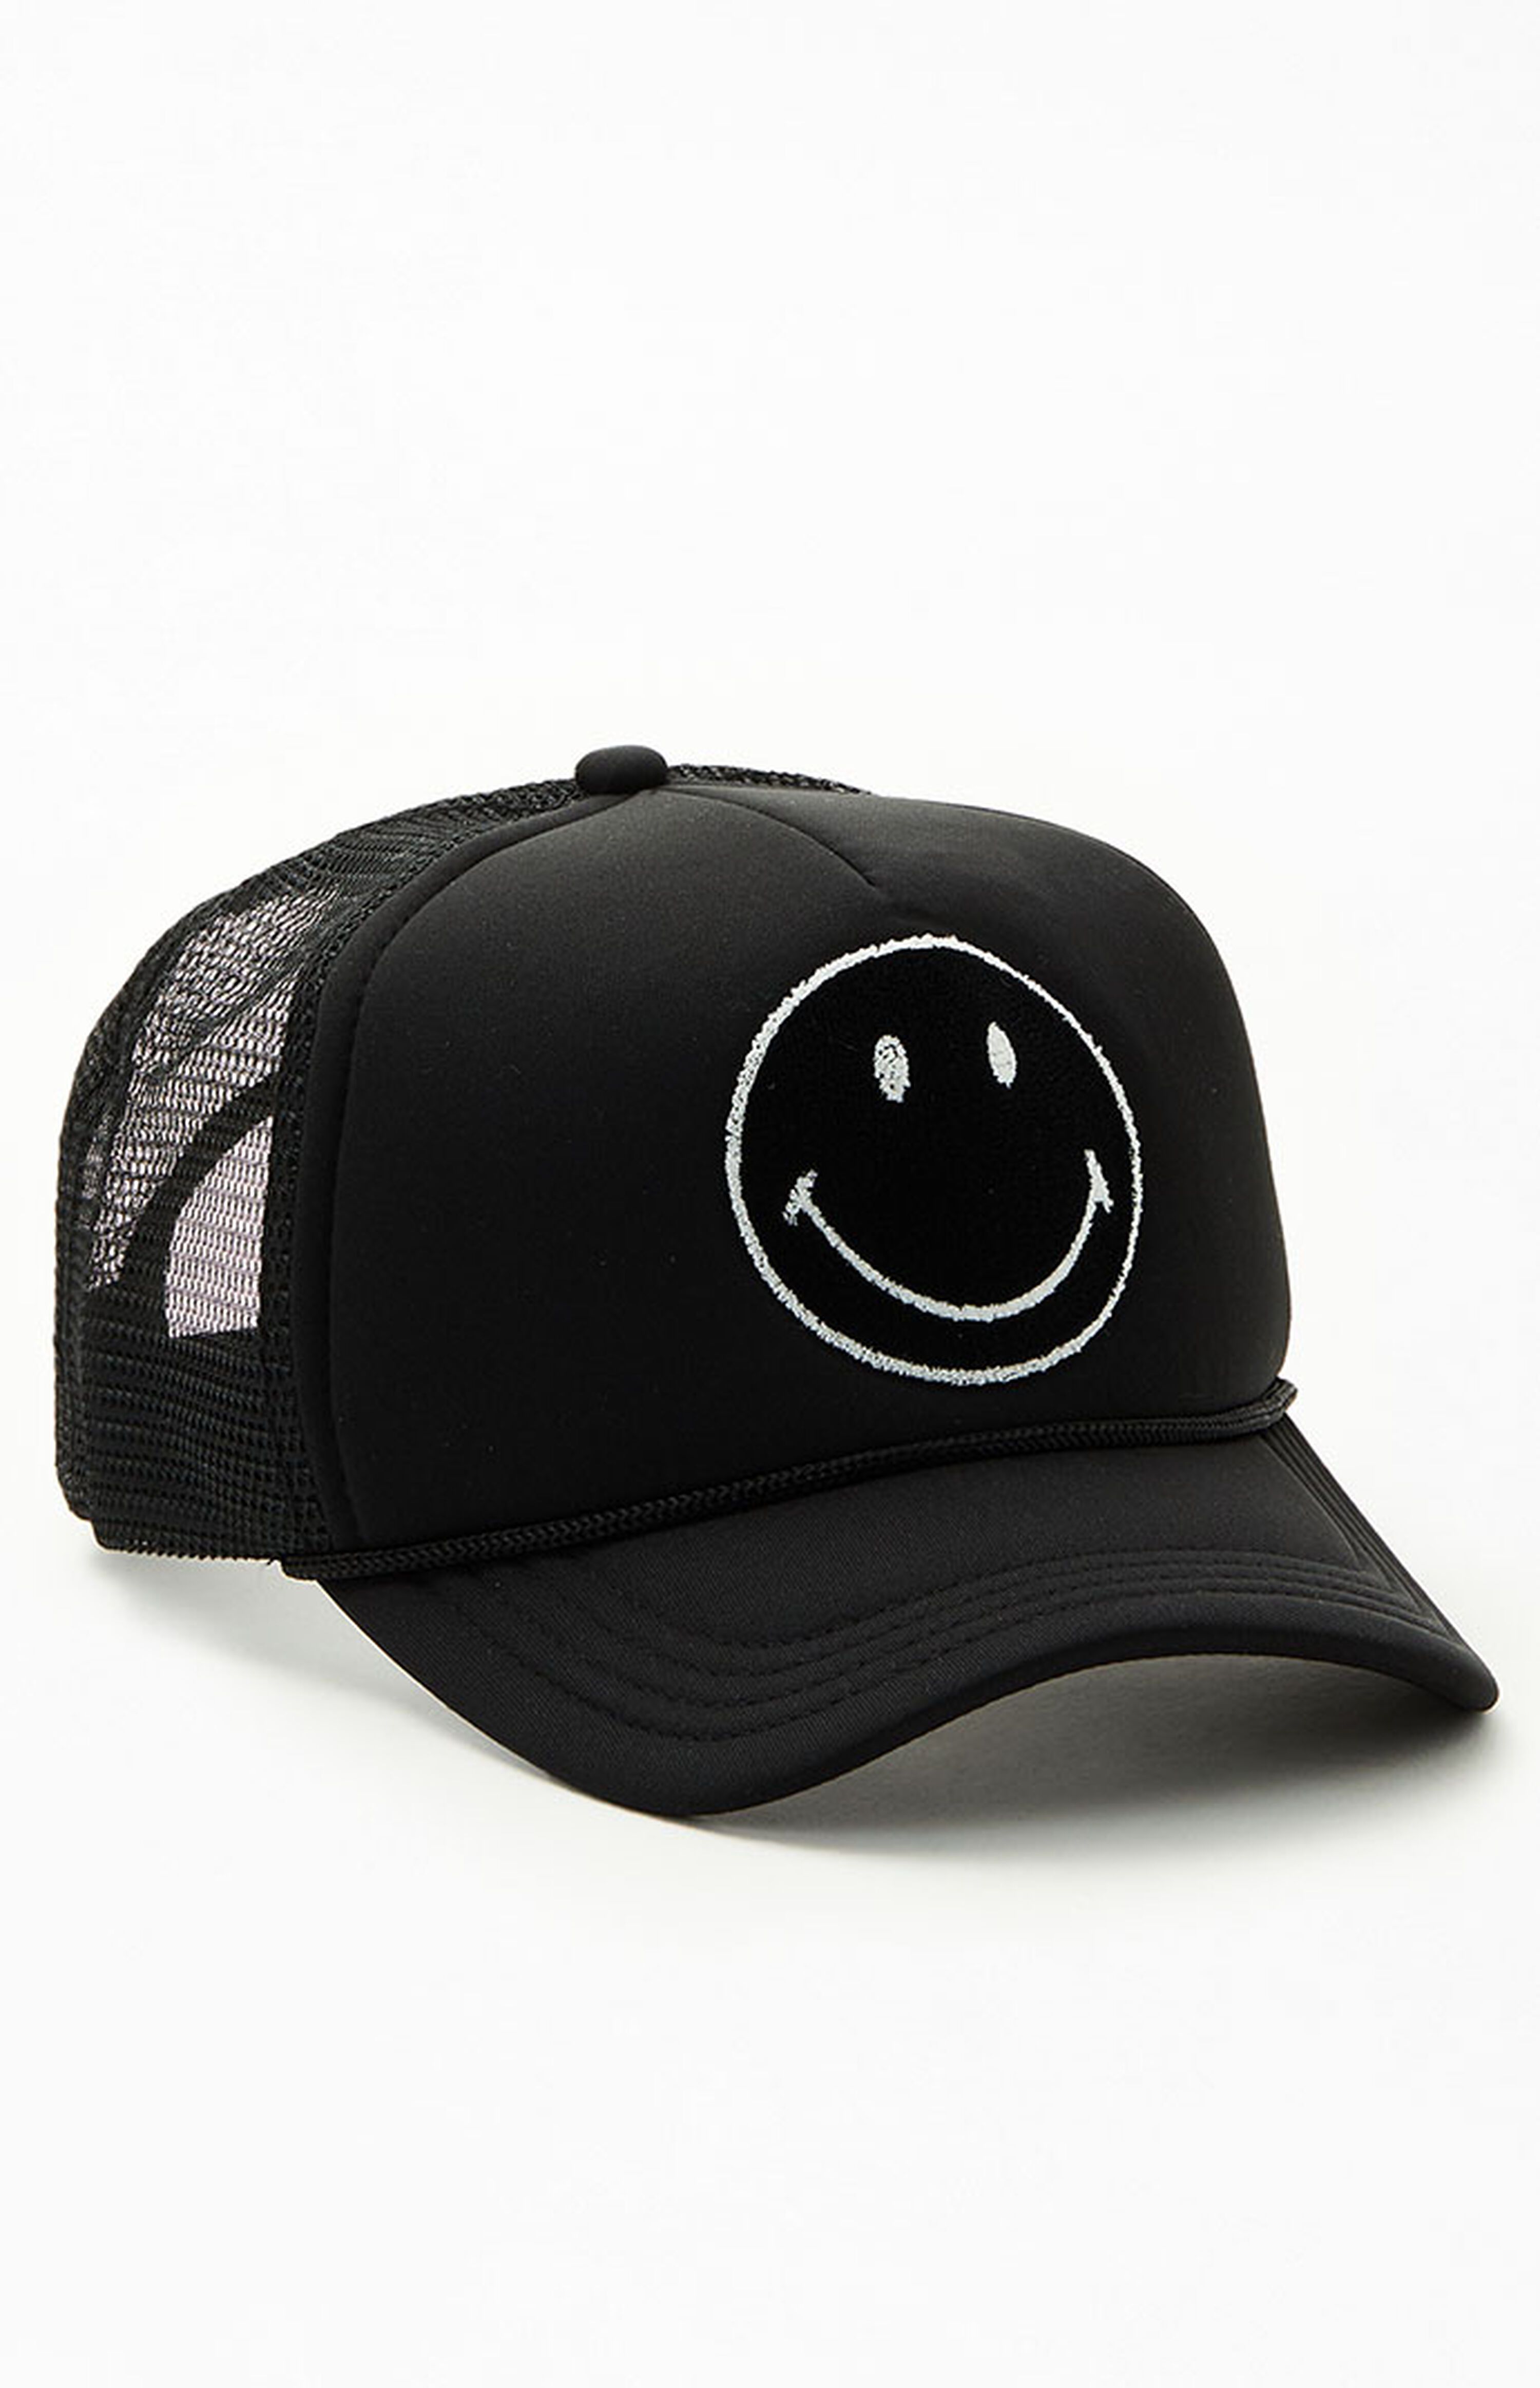 Smiley Face Trucker Hat | PacSun